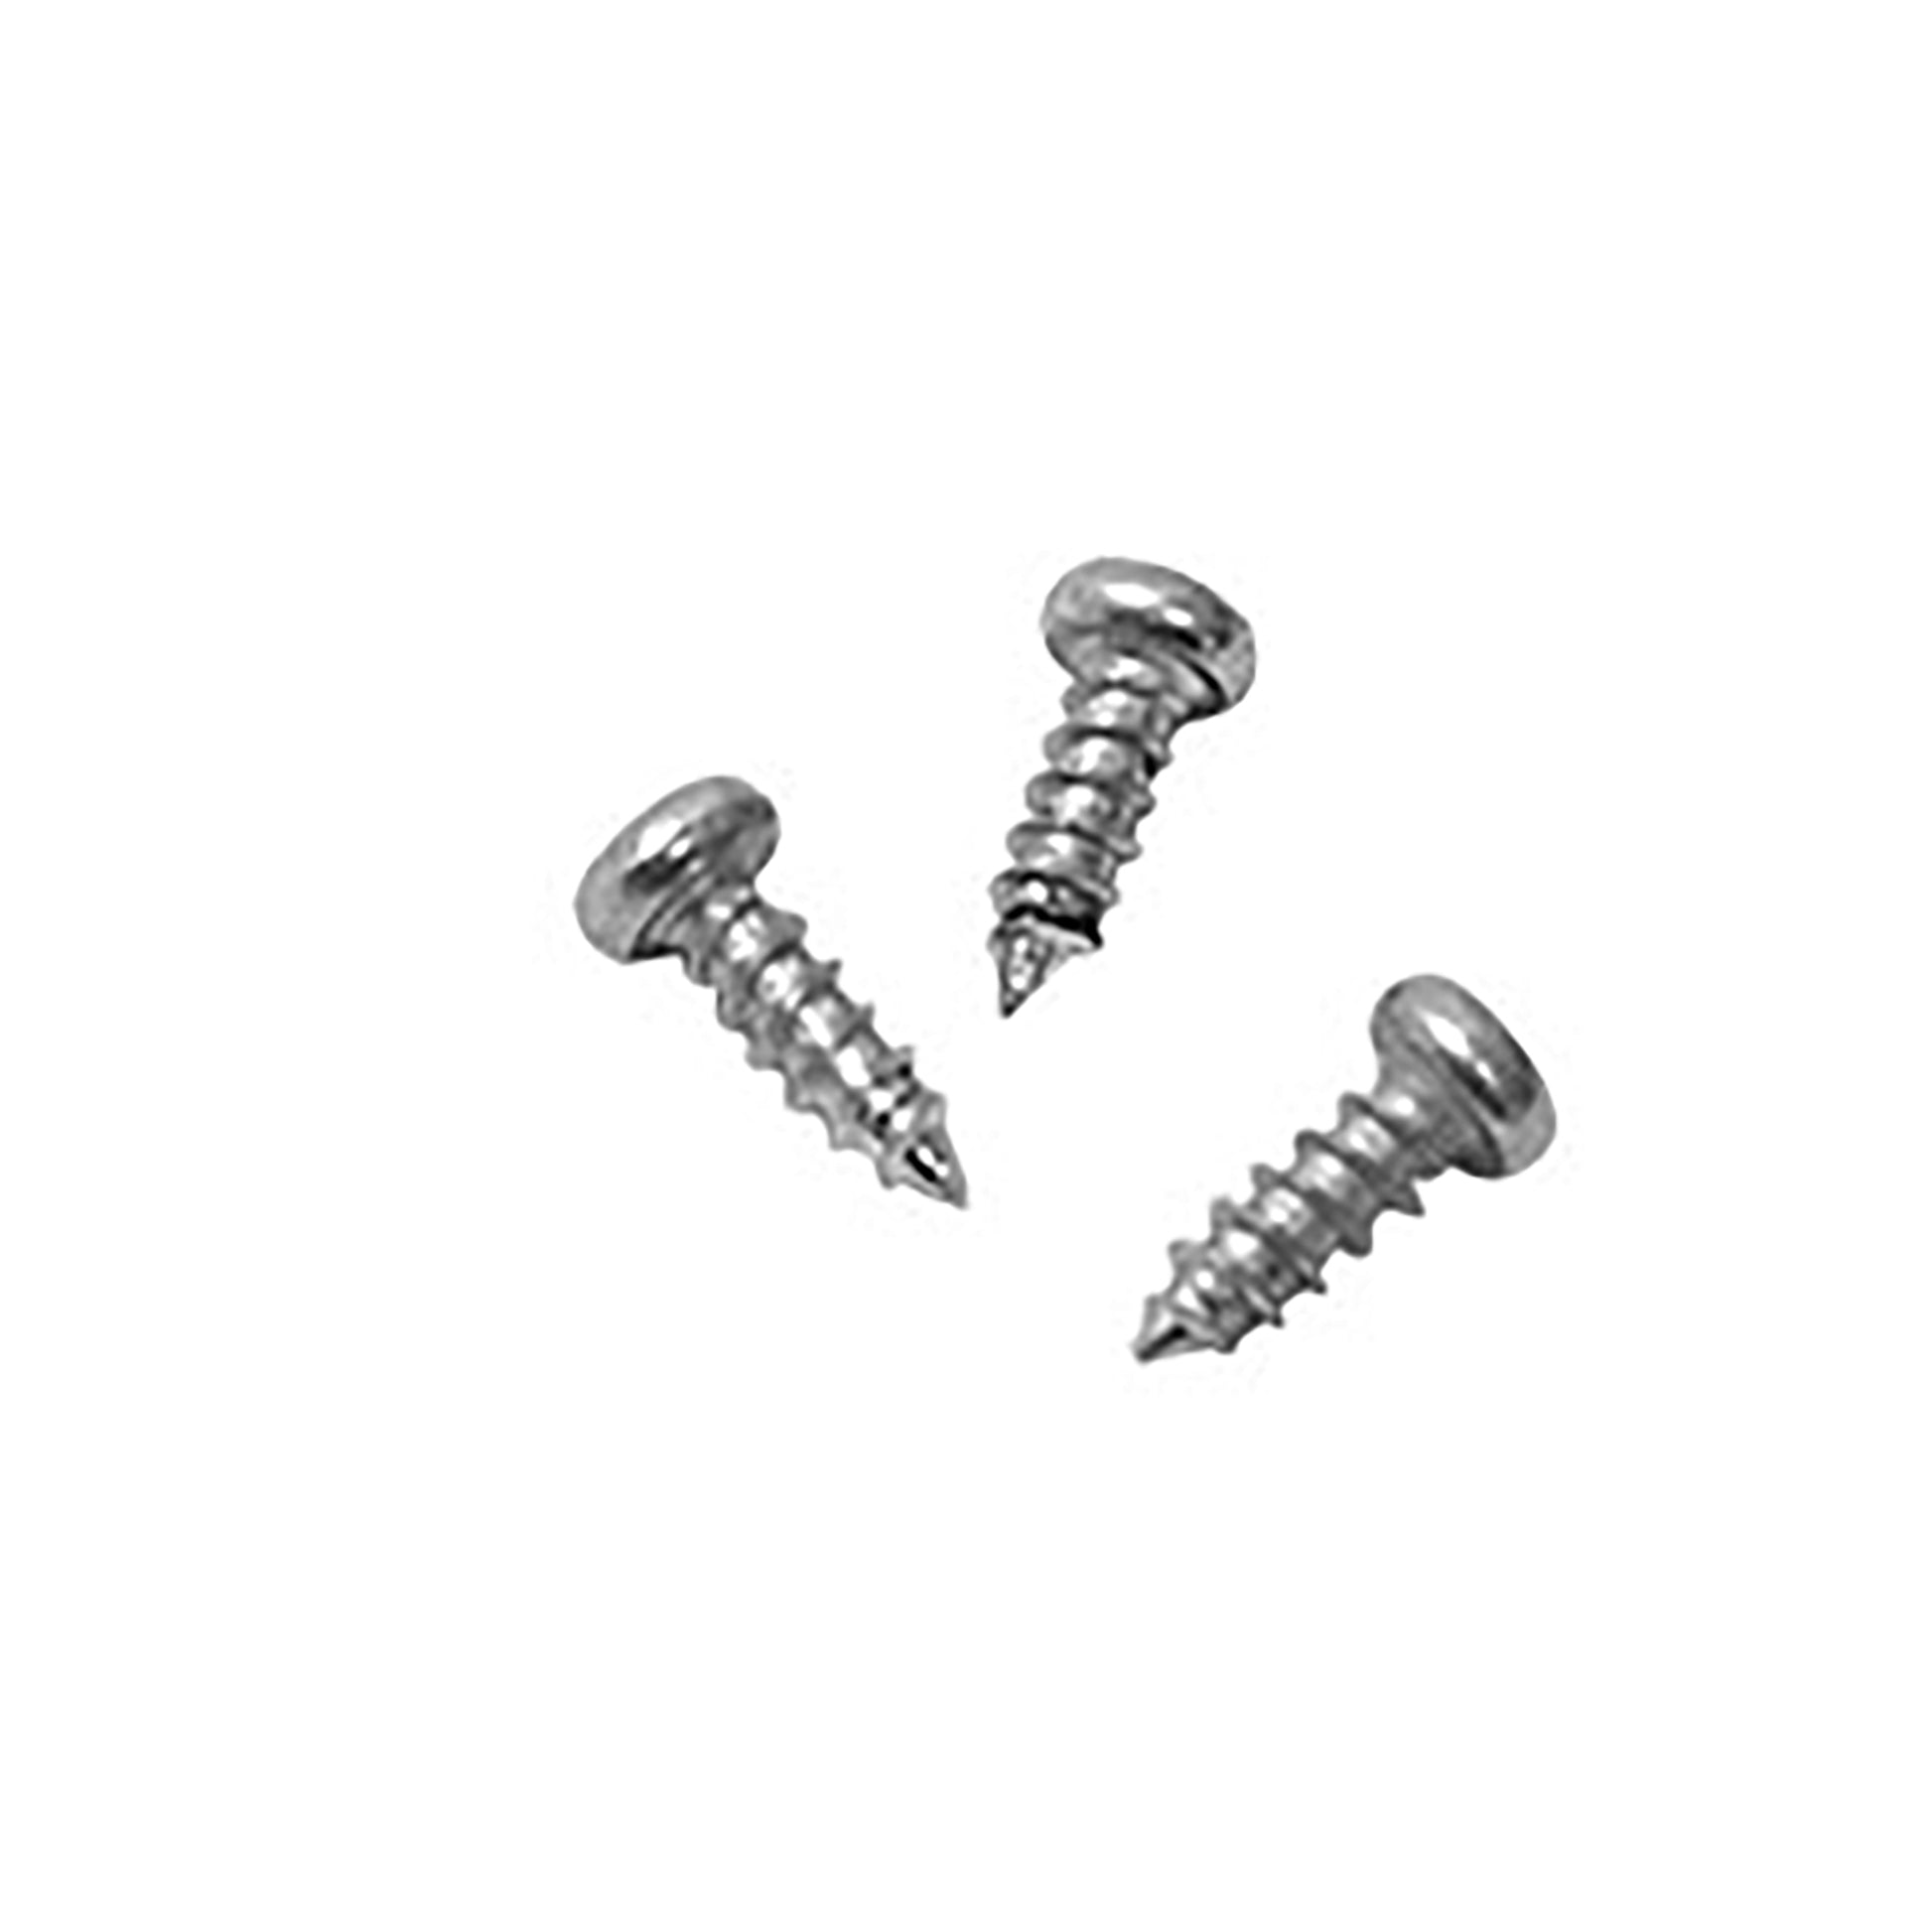 Motor Housing Screws for BR-252A Inflatable Blower